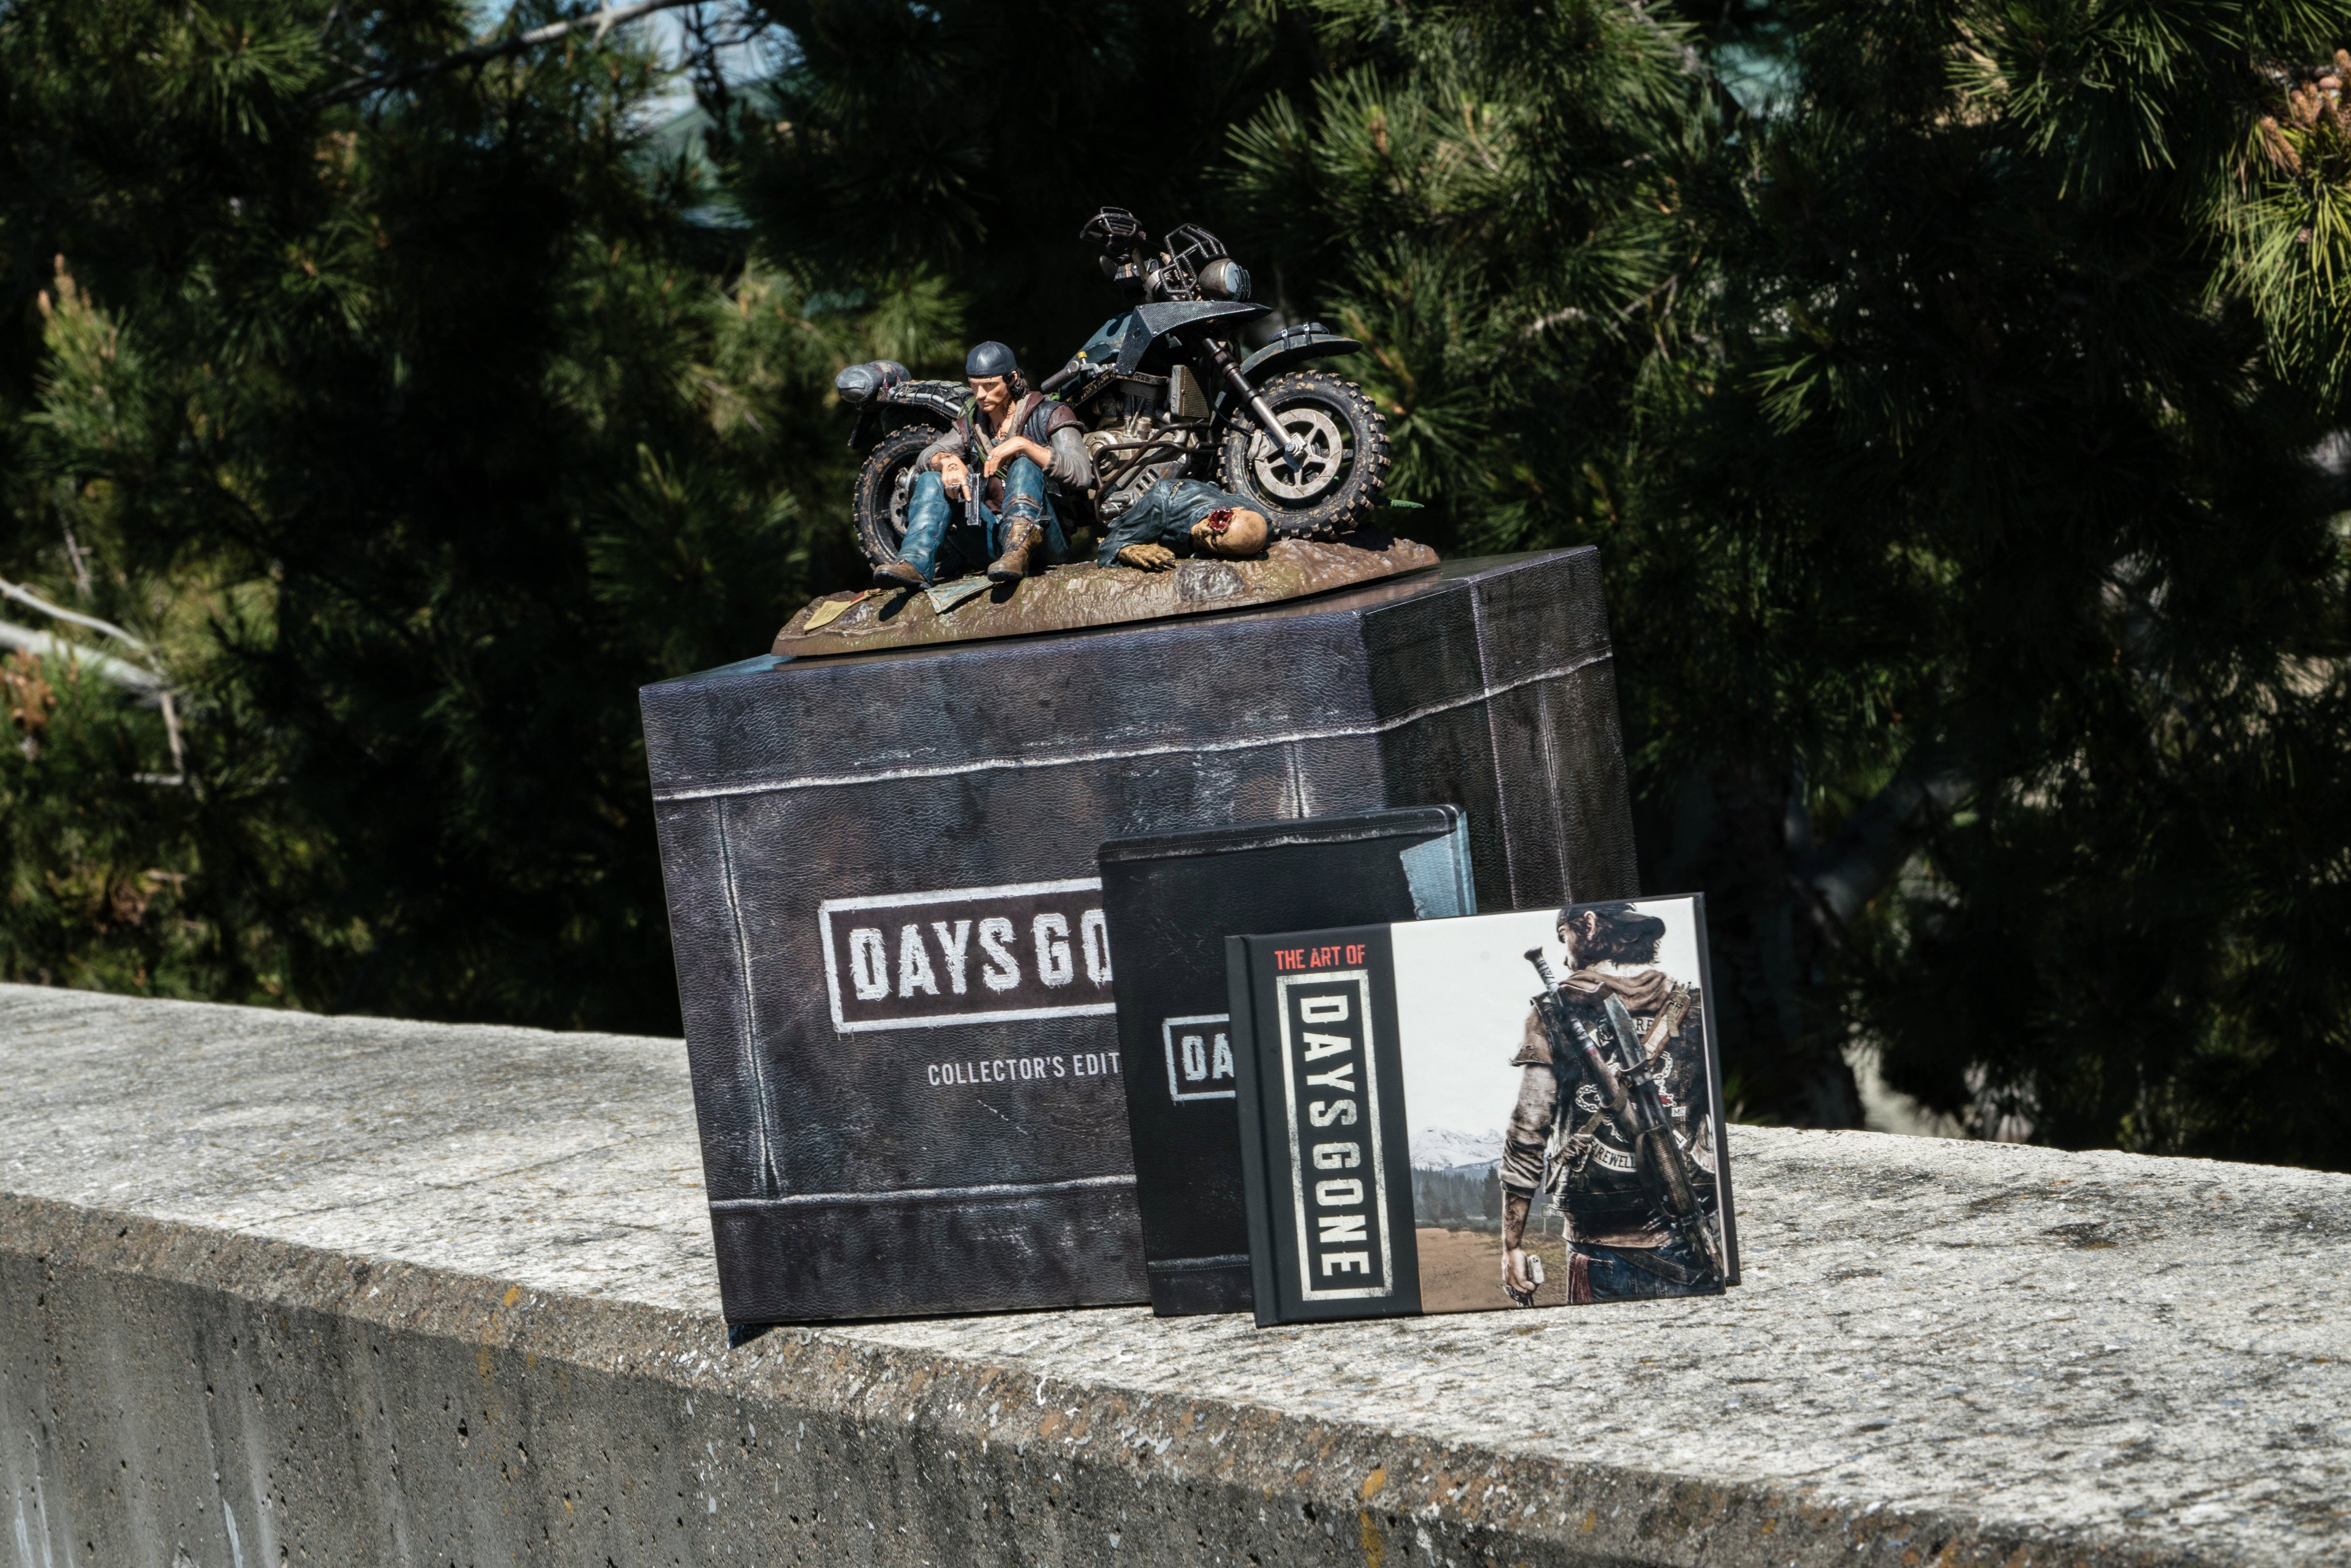 LTTP: Days Gone 2019 (PS4)